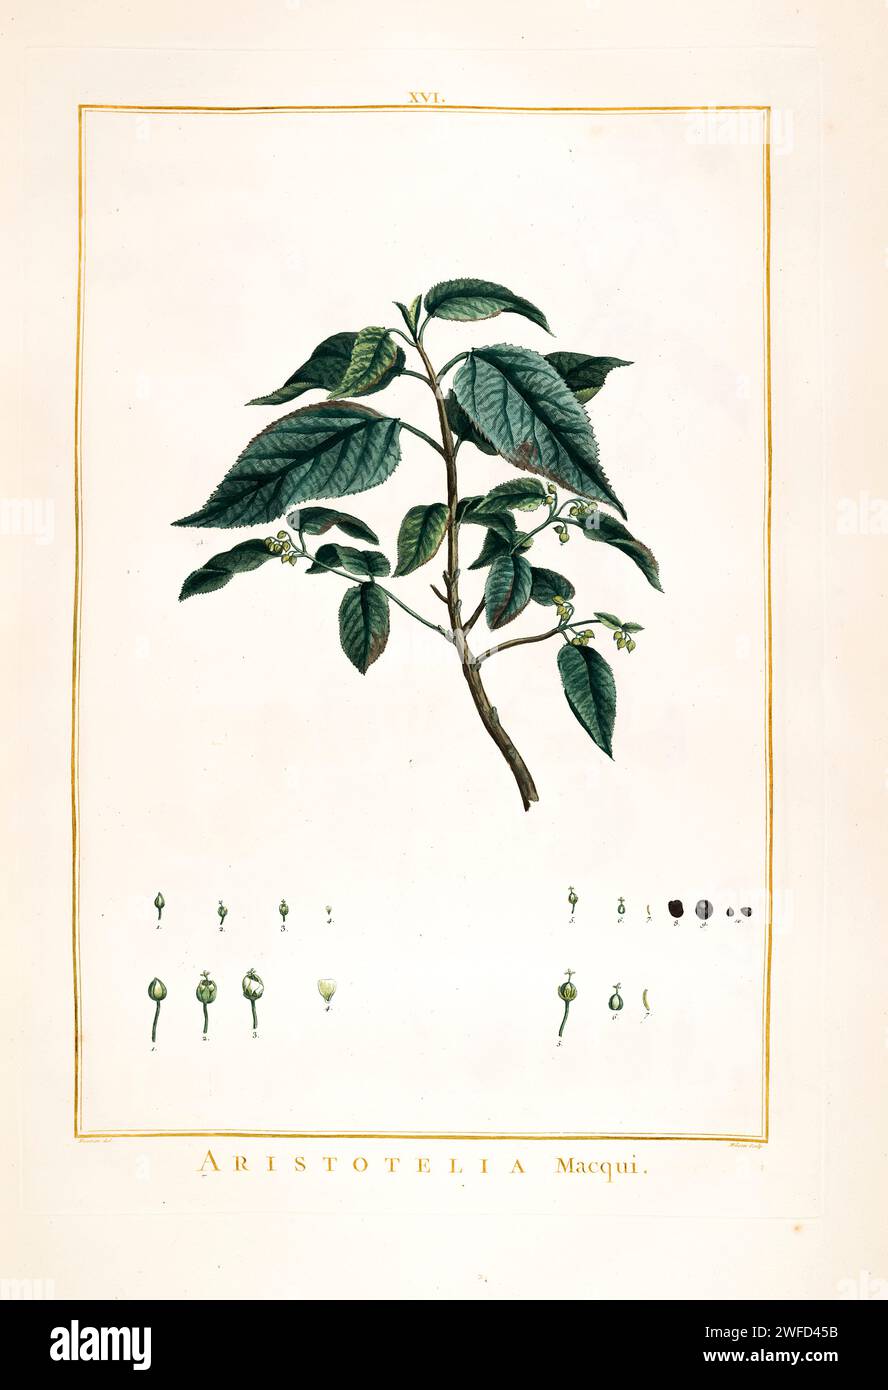 Aristotelia chilensis, here as Aristotelia macqui known as maqui or Chilean wineberry, is a tree species in the Elaeocarpaceae family native to South America in the Valdivian temperate forests of Chile and adjacent regions of southern Argentina. Hand Painted by Pierre-Joseph Redouté in 1784 Stock Photo